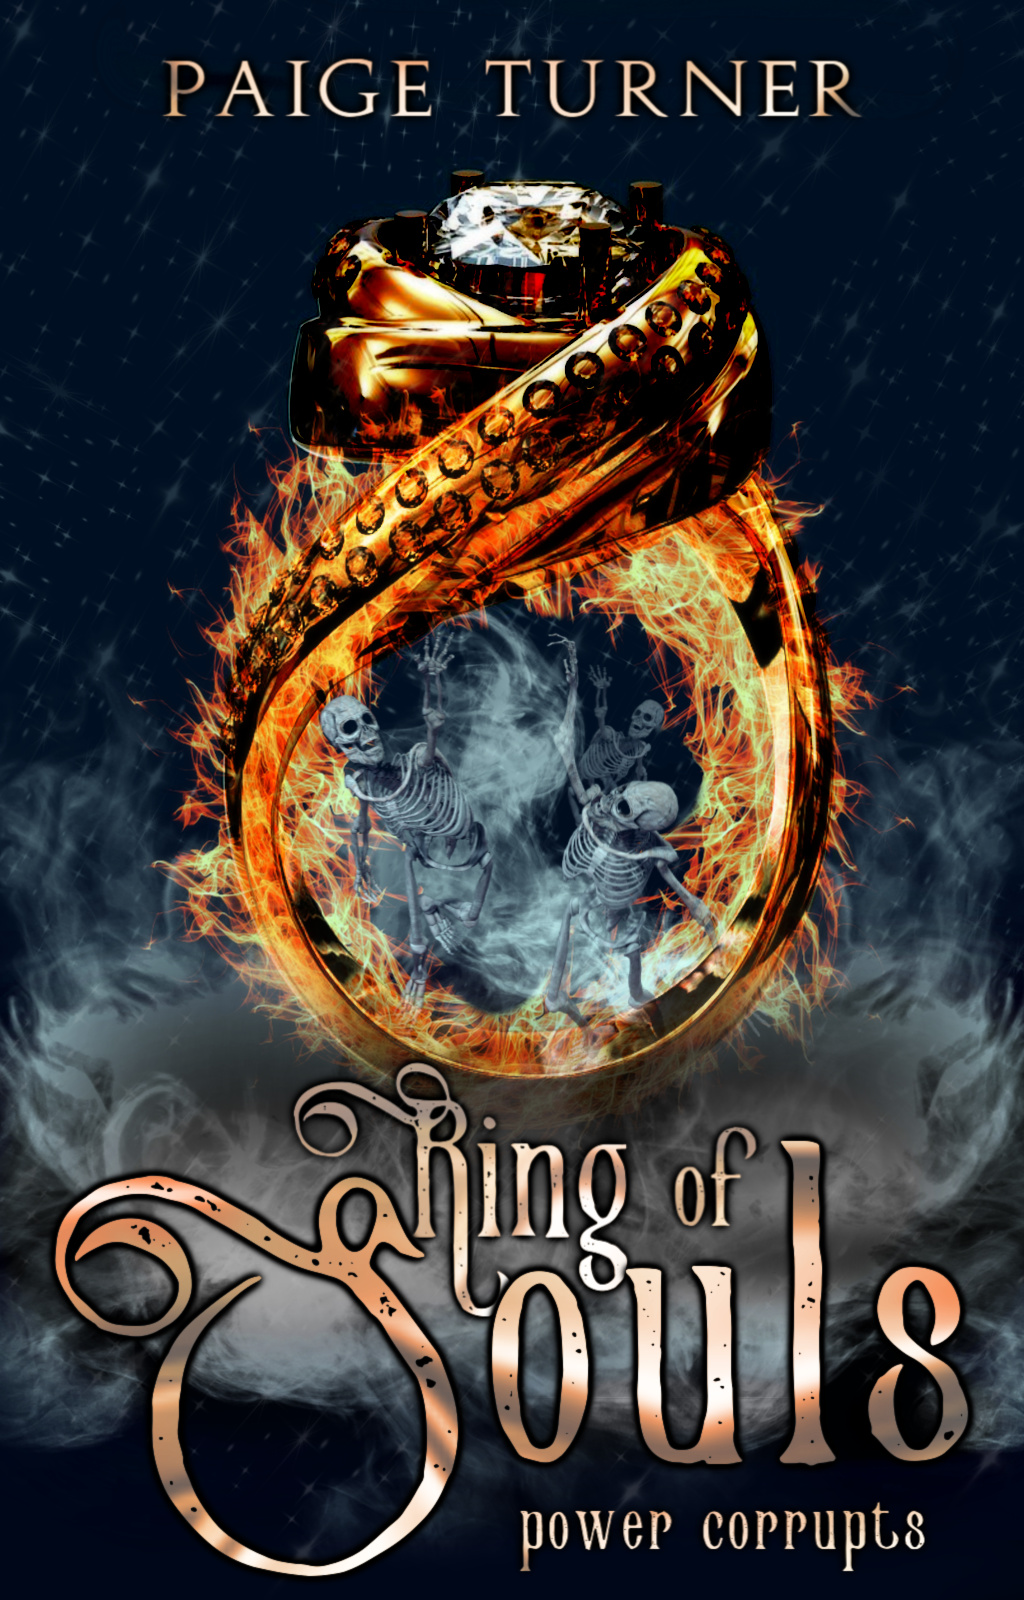 197-617-ring-of-souls-cover-silver-text.jpg